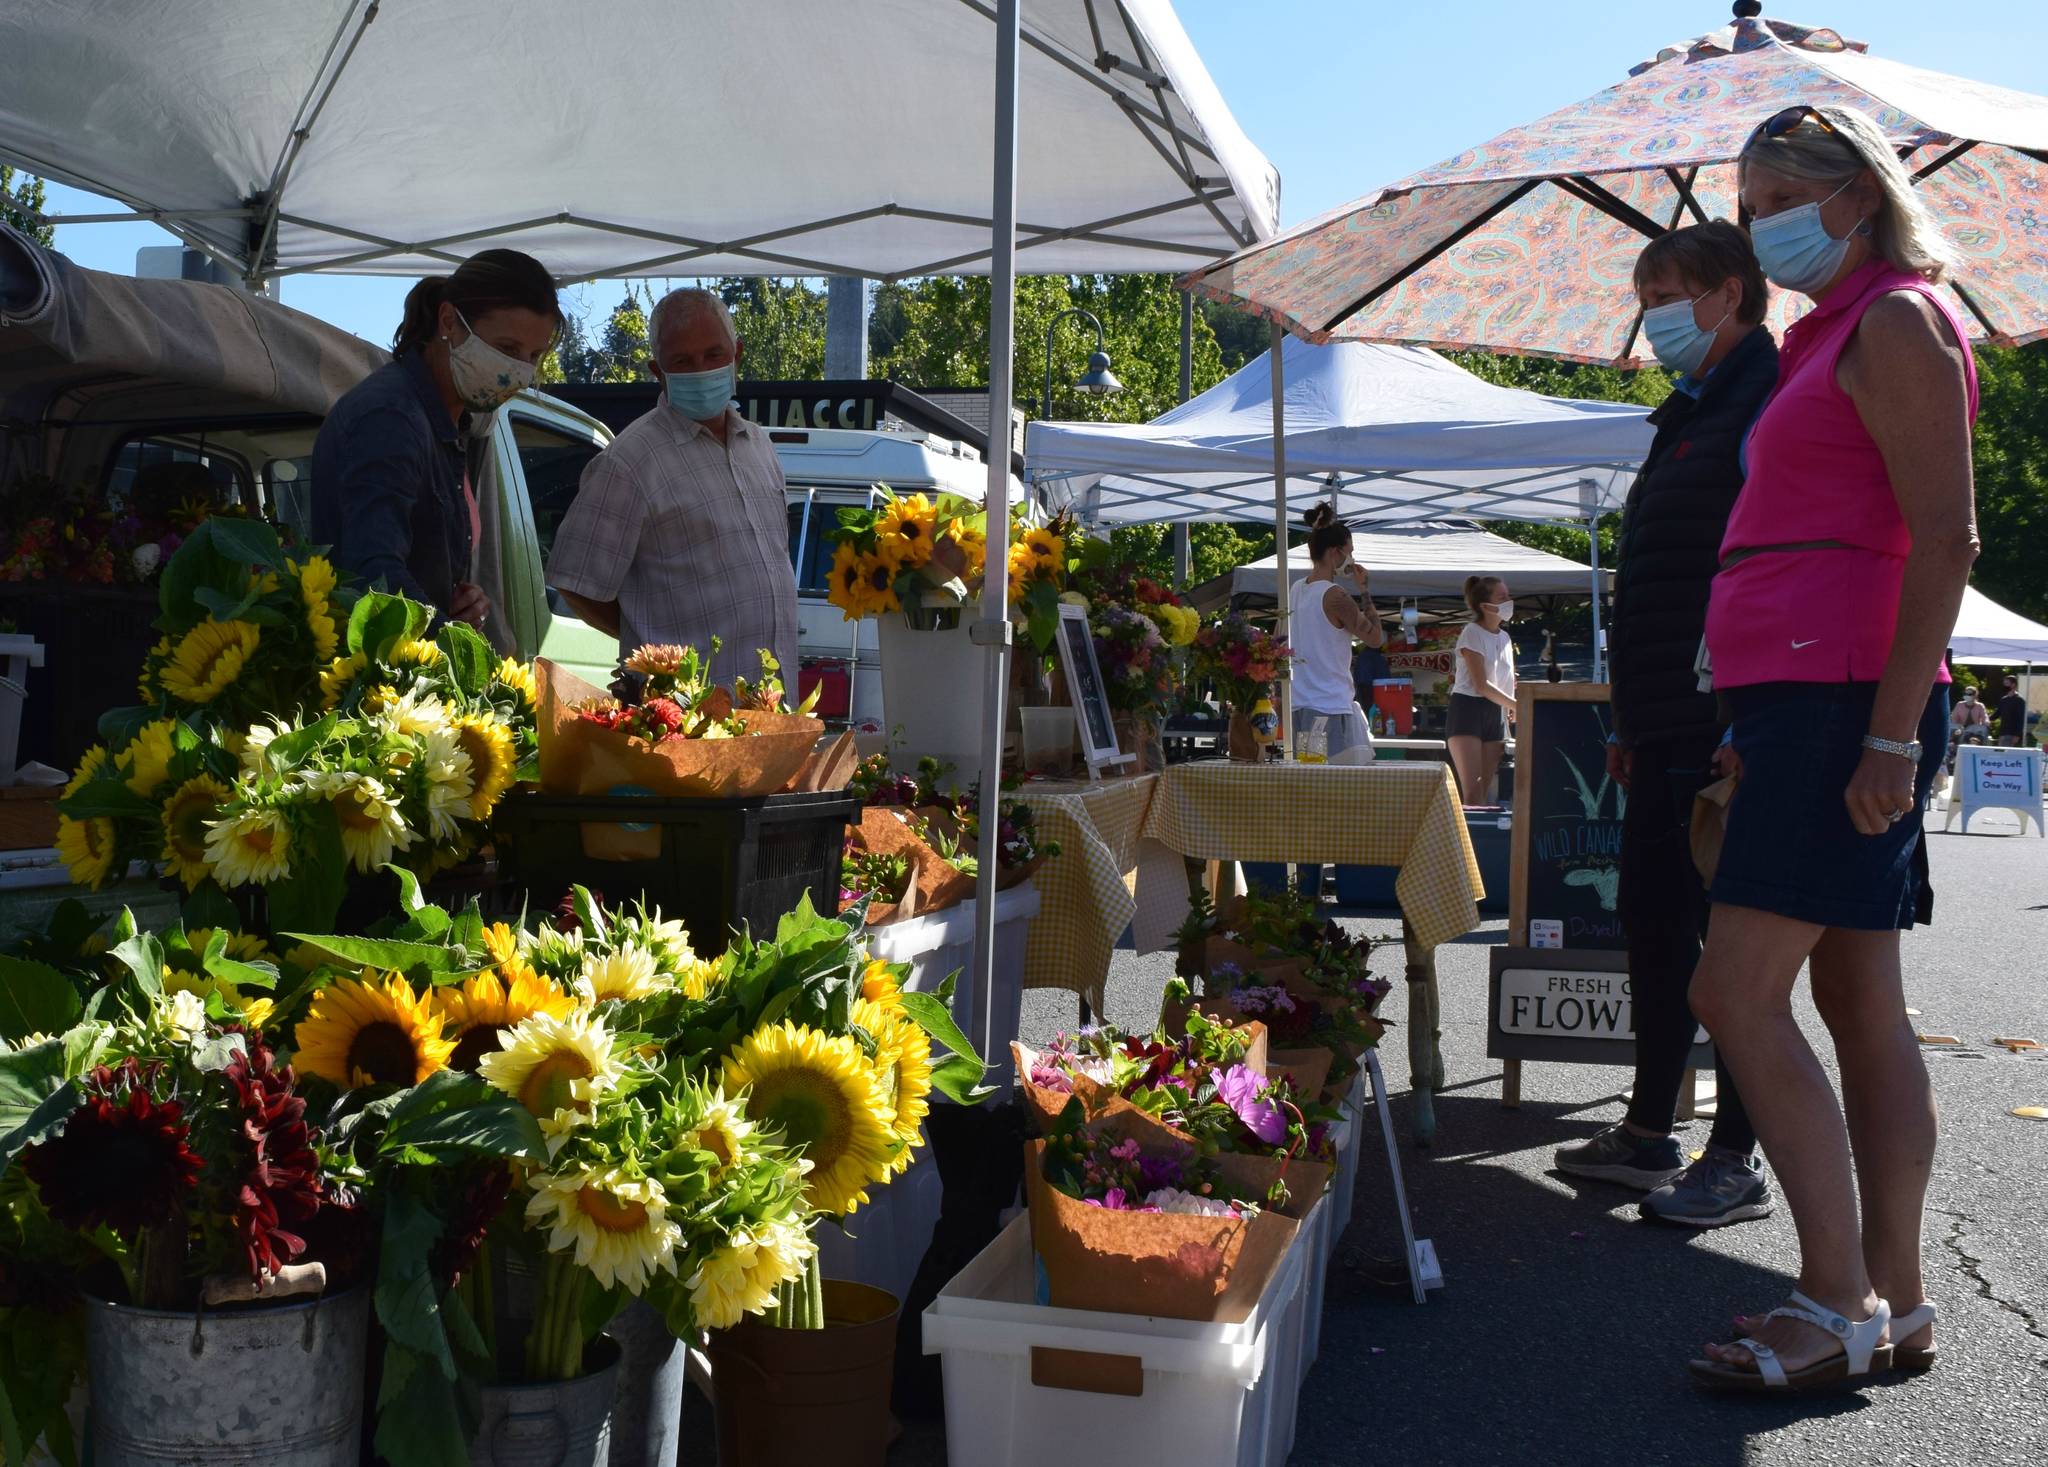 People bring ‘good vibes’ to the Mercer Island Farmers Market